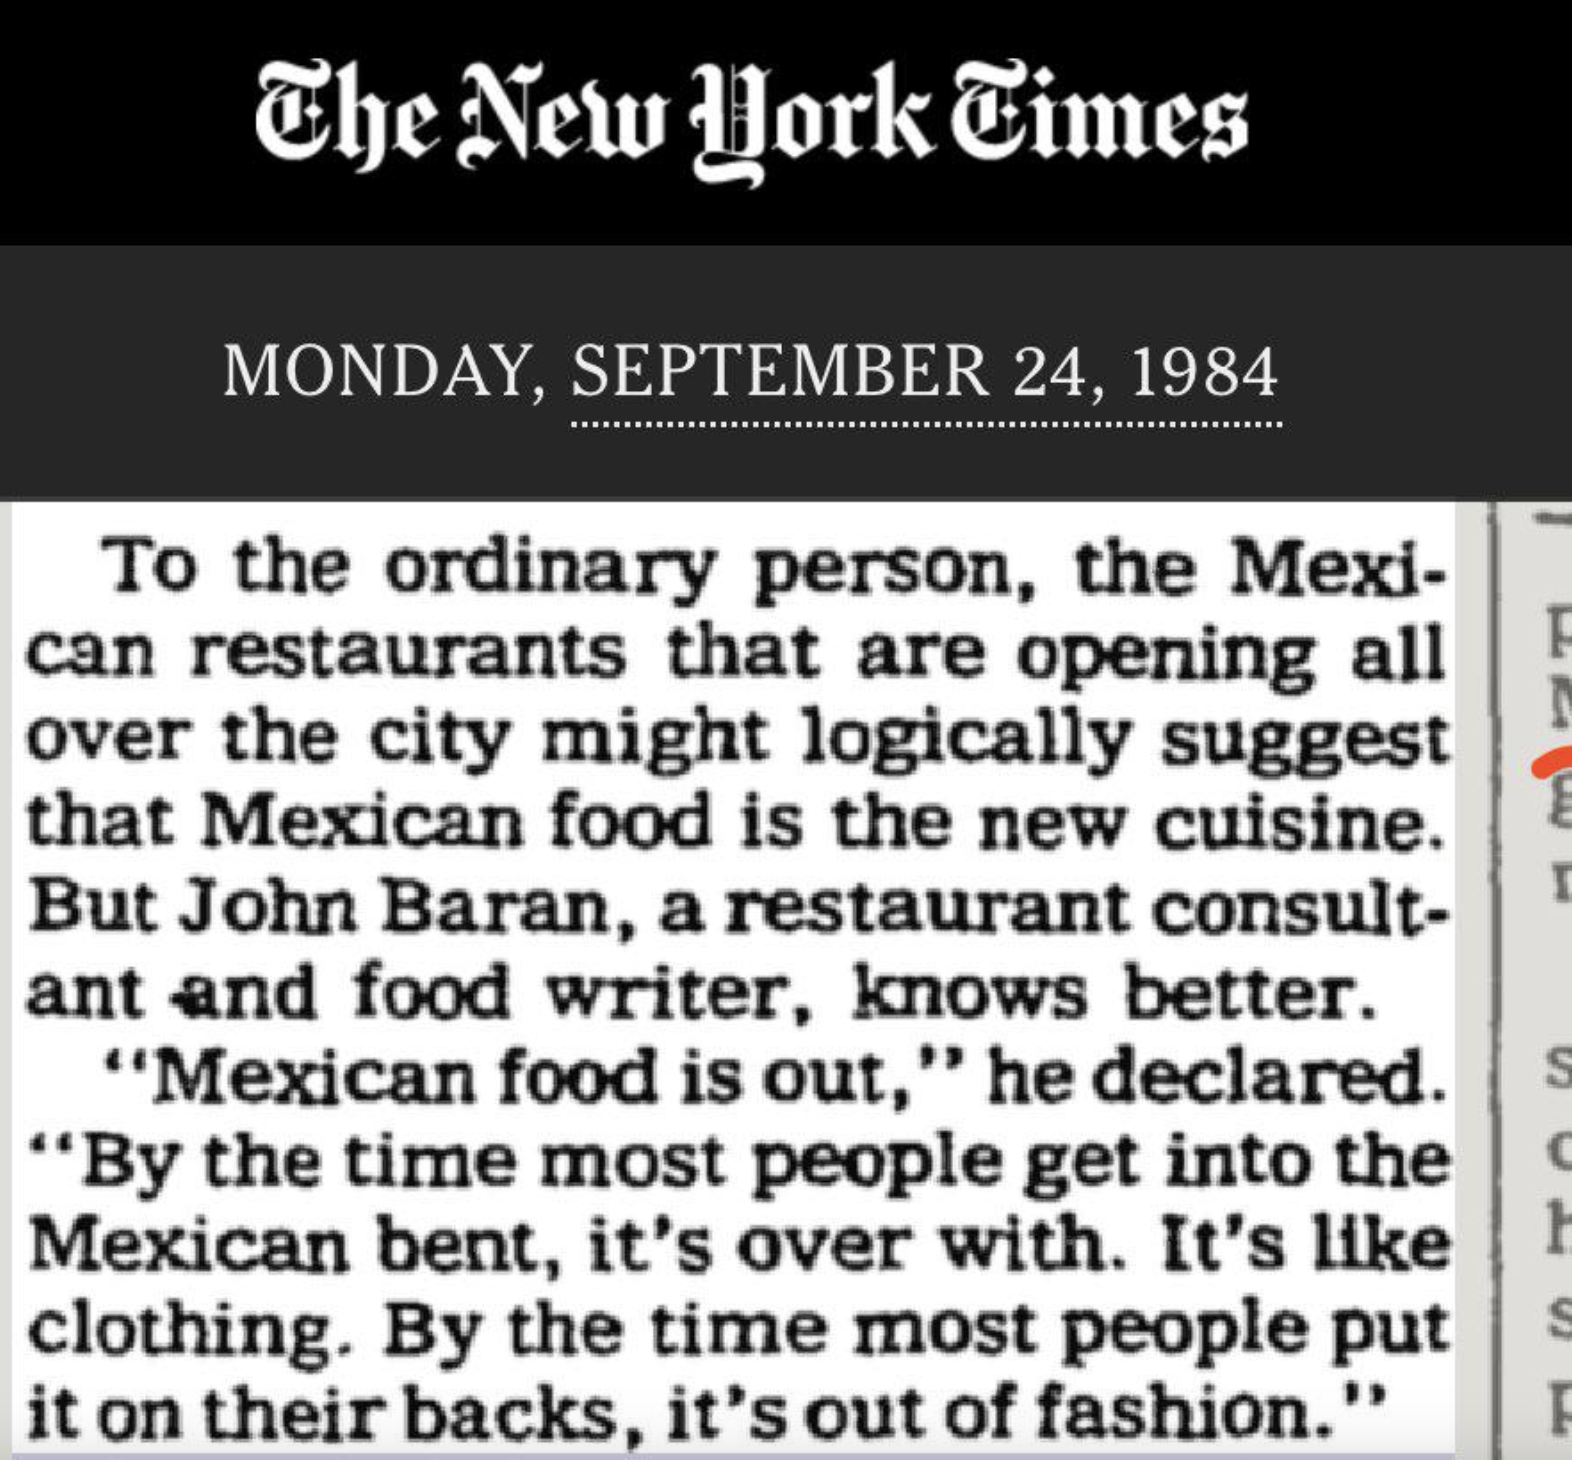 screenshot - The New York Times Monday, To the ordinary person, the Mexi can restaurants that are opening all over the city might logically suggest that Mexican food is the new cuisine. But John Baran, a restaurant consult ant and food writer, knows bette